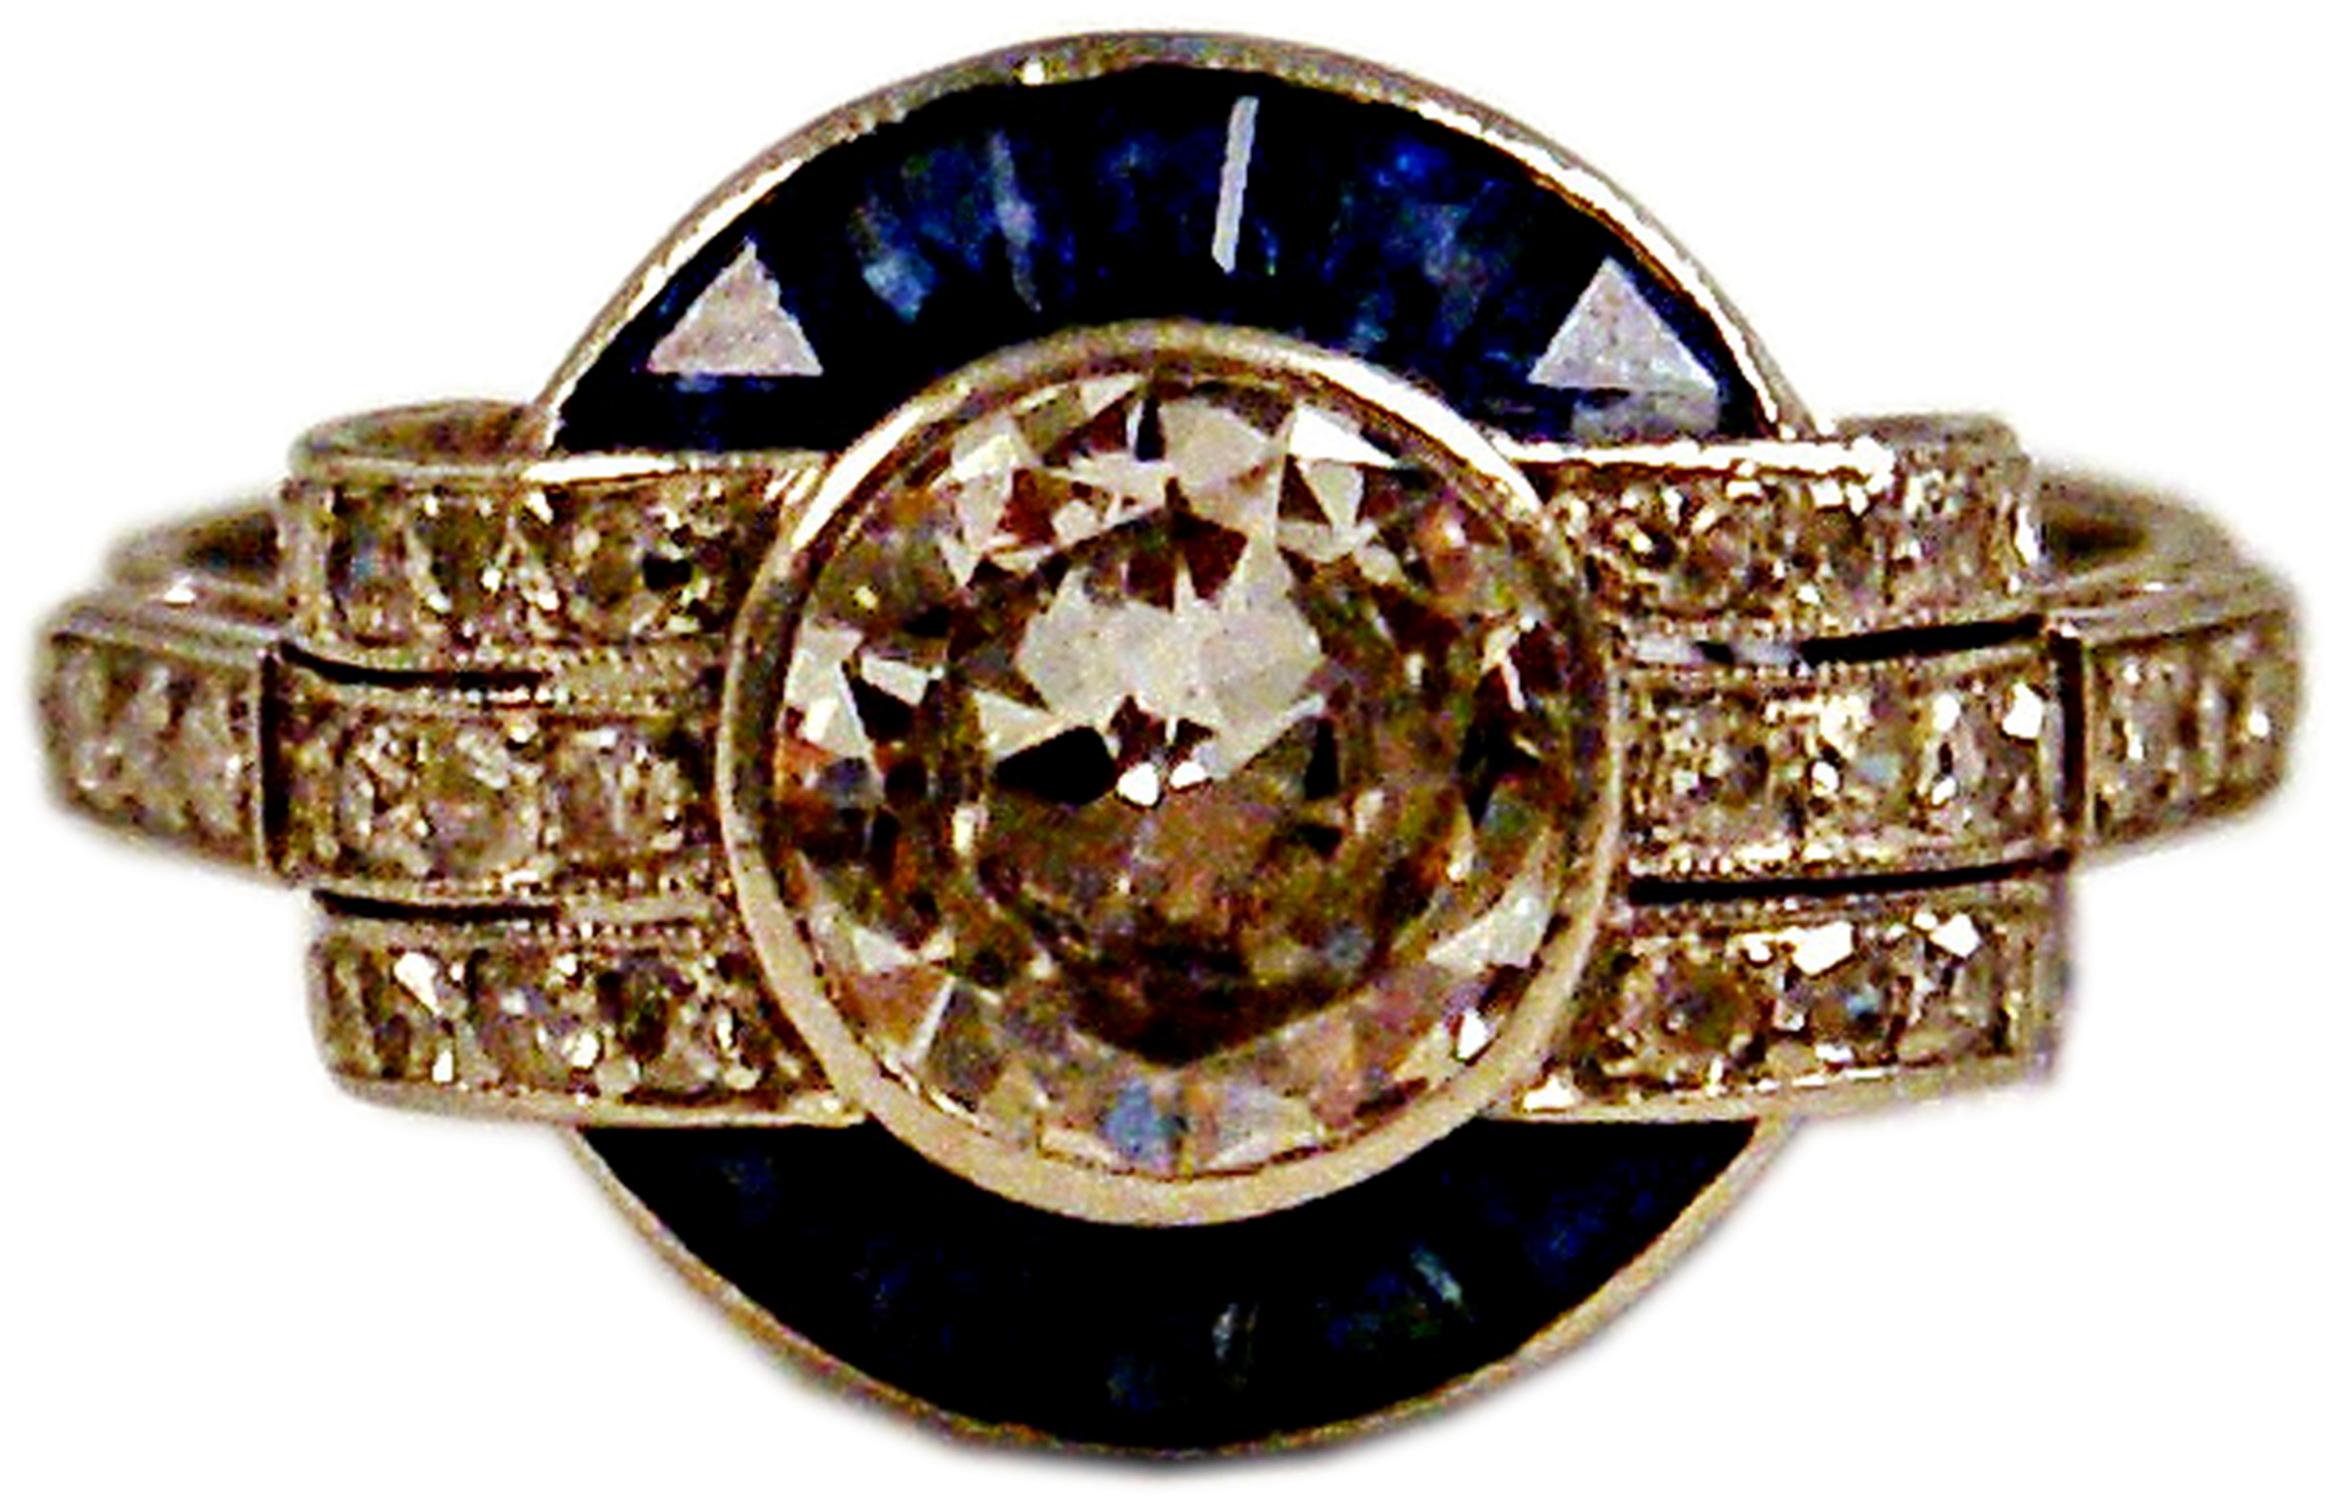 Art Deco Gorgeous Cluster Ring:
PLATINUM  &  ONE LARGE DIAMOND IN MIDDLE AREA  (VINTAGE CUTS / 1.0 Carat)
plus smaller diamonds and sapphires   

Most elegant Art Deco Cluster Ring of French manufactory: 
One large diamond (1.0 Carat) attached to